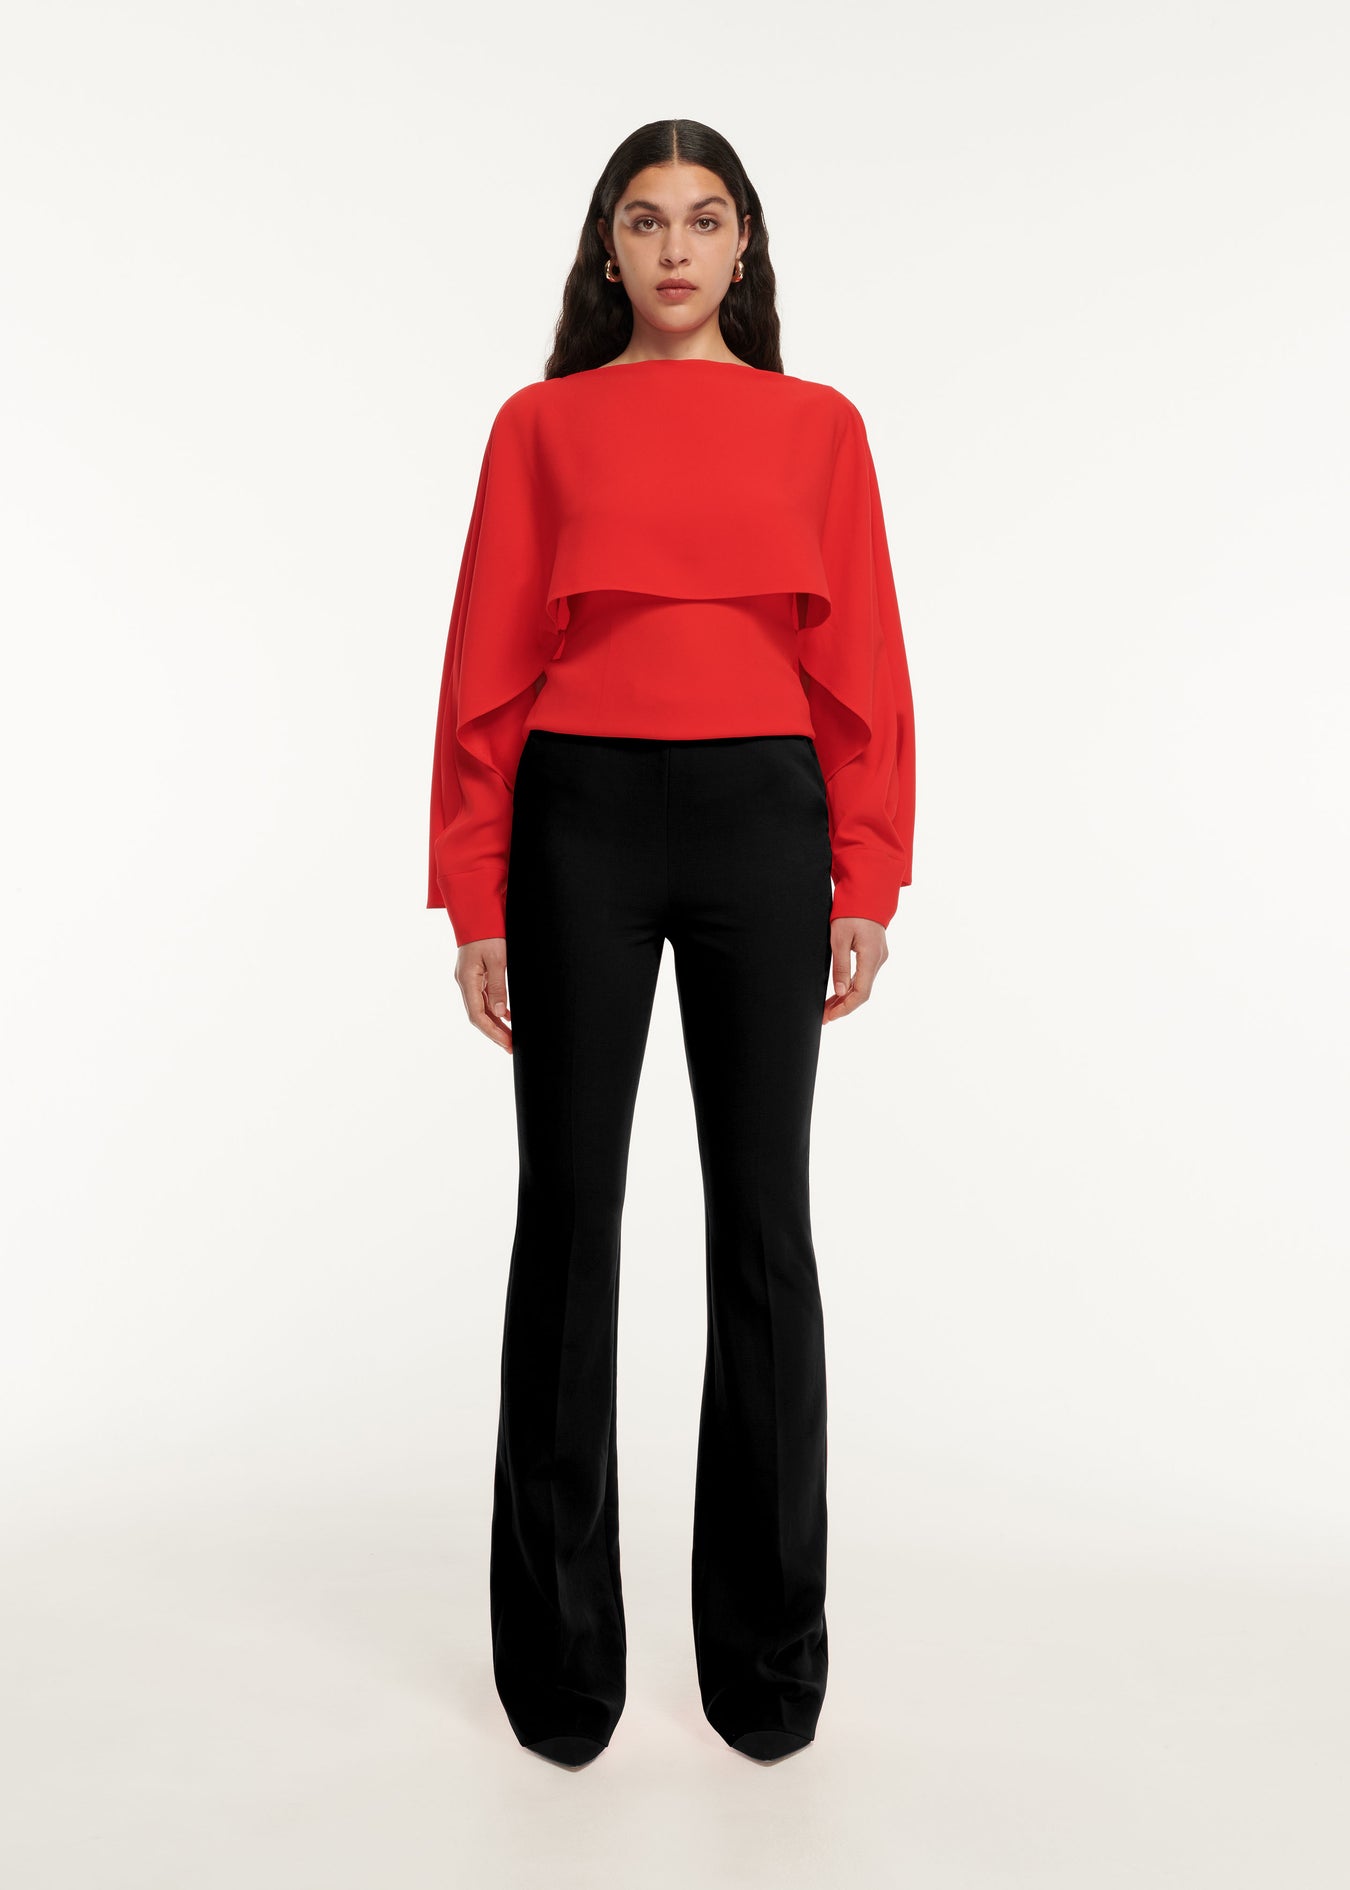 A woman wearing the Long Sleeve Satin Crepe Top in Red